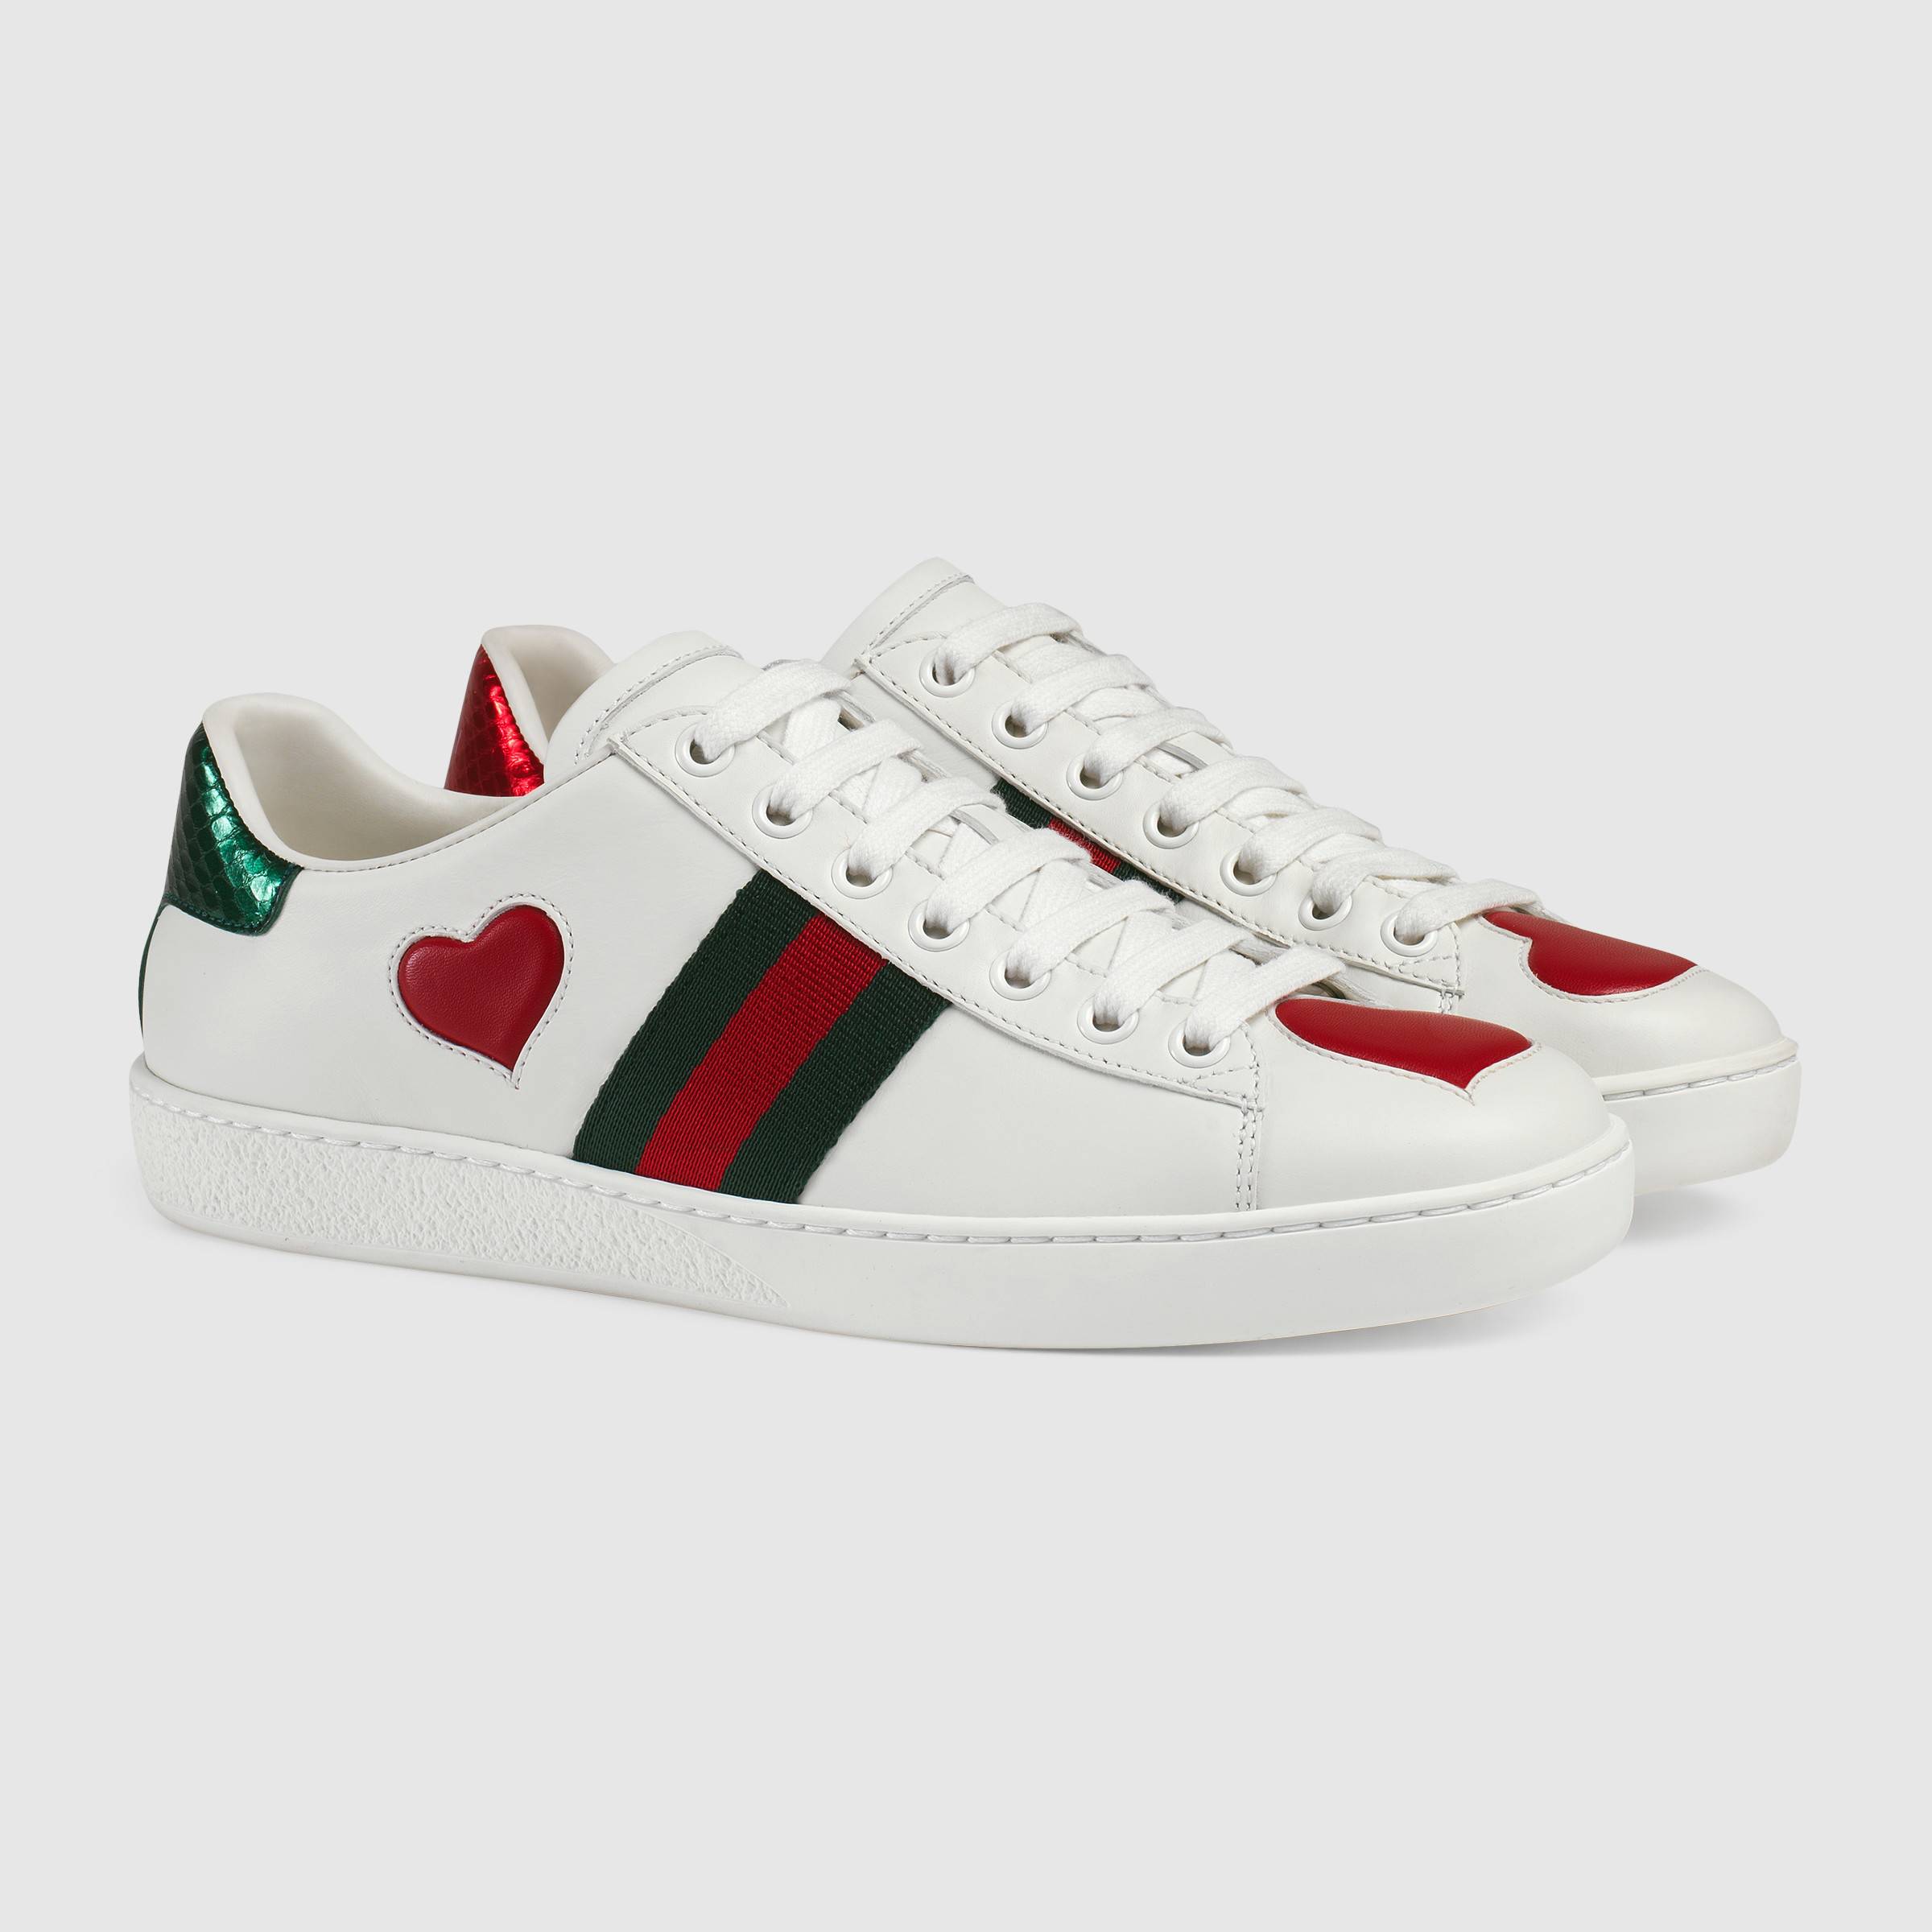 Ace embroidered sneaker_Heart_03